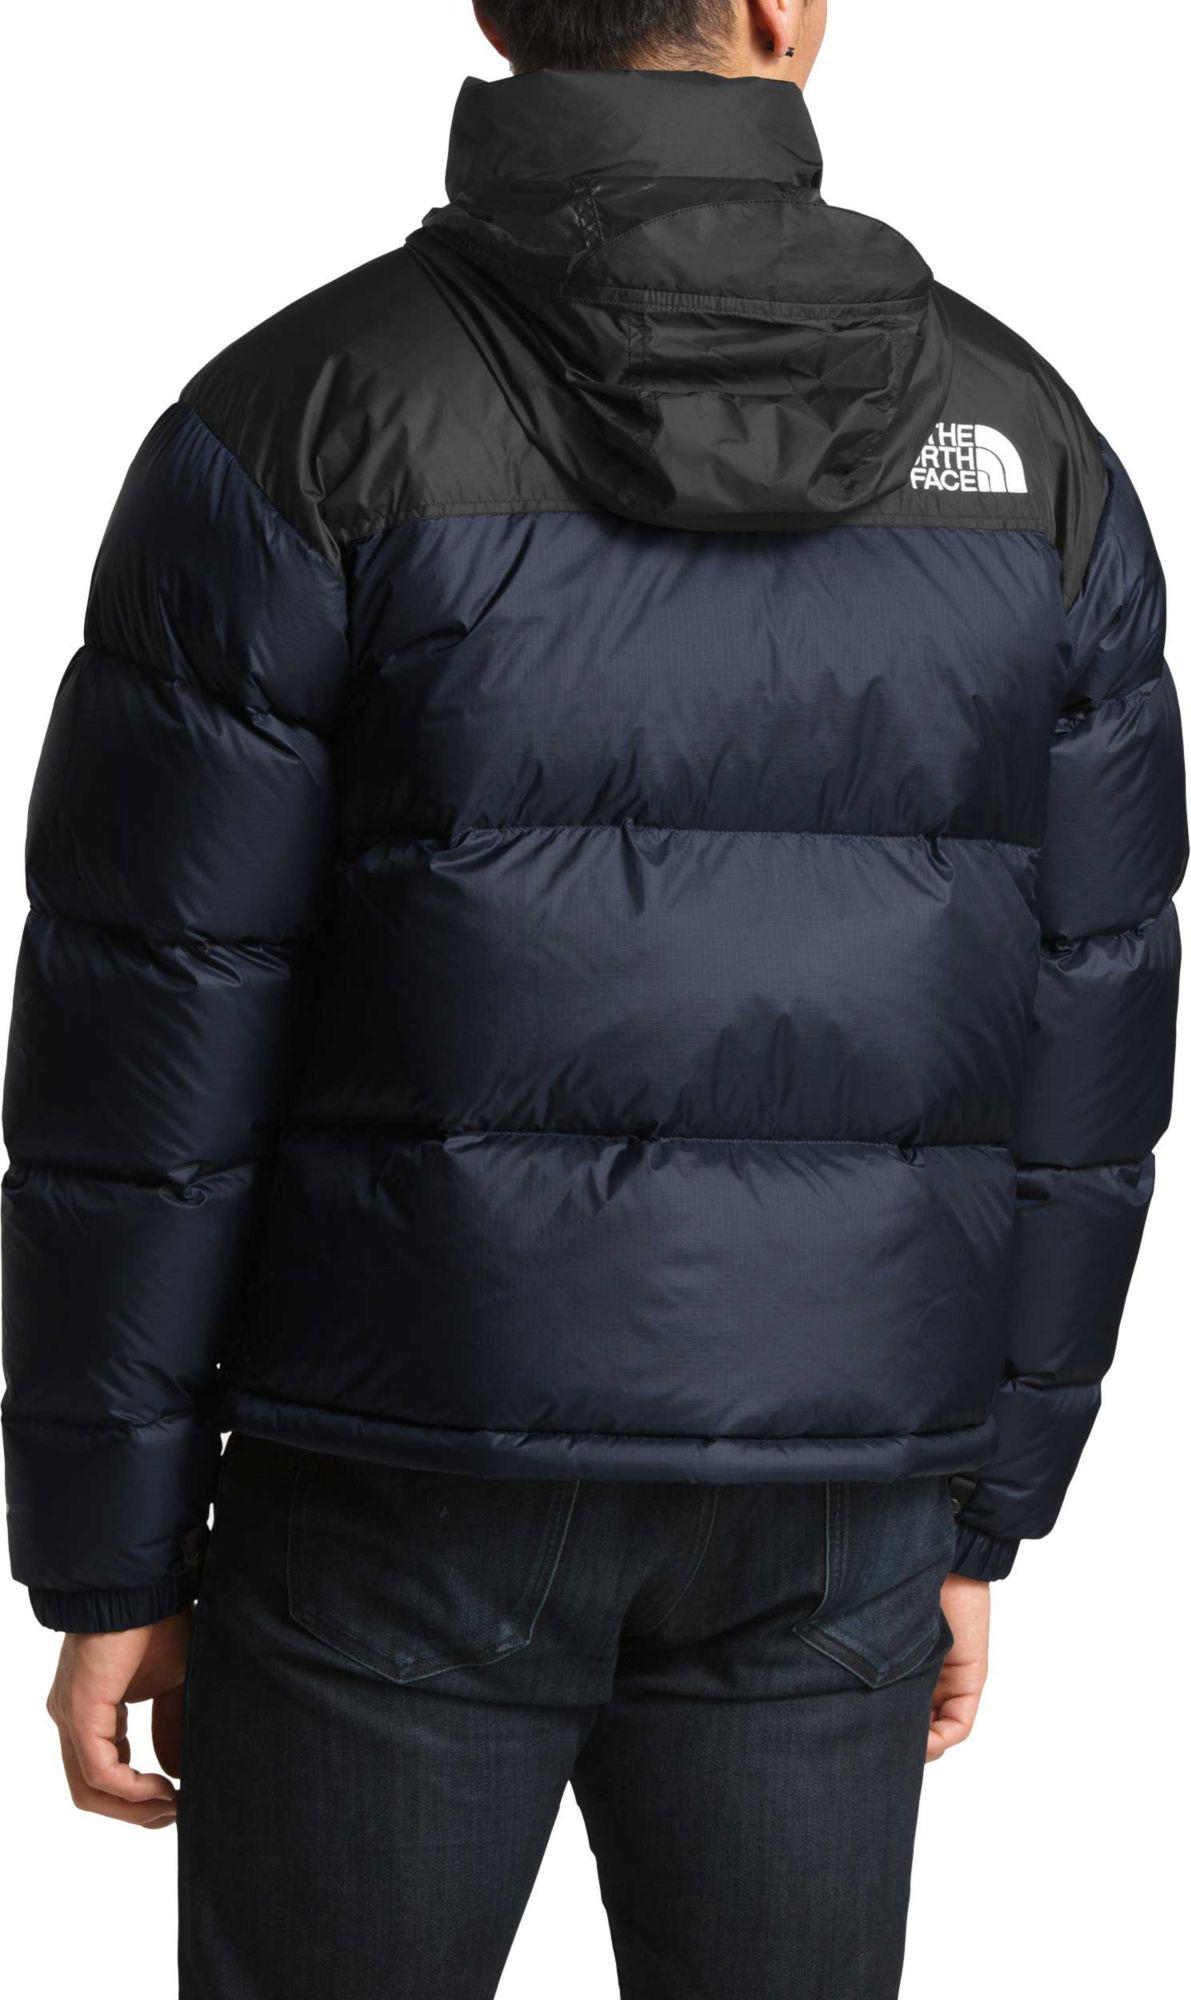 The North Face 1996 Retro Nuptse Jacket in Blue for Men - Lyst